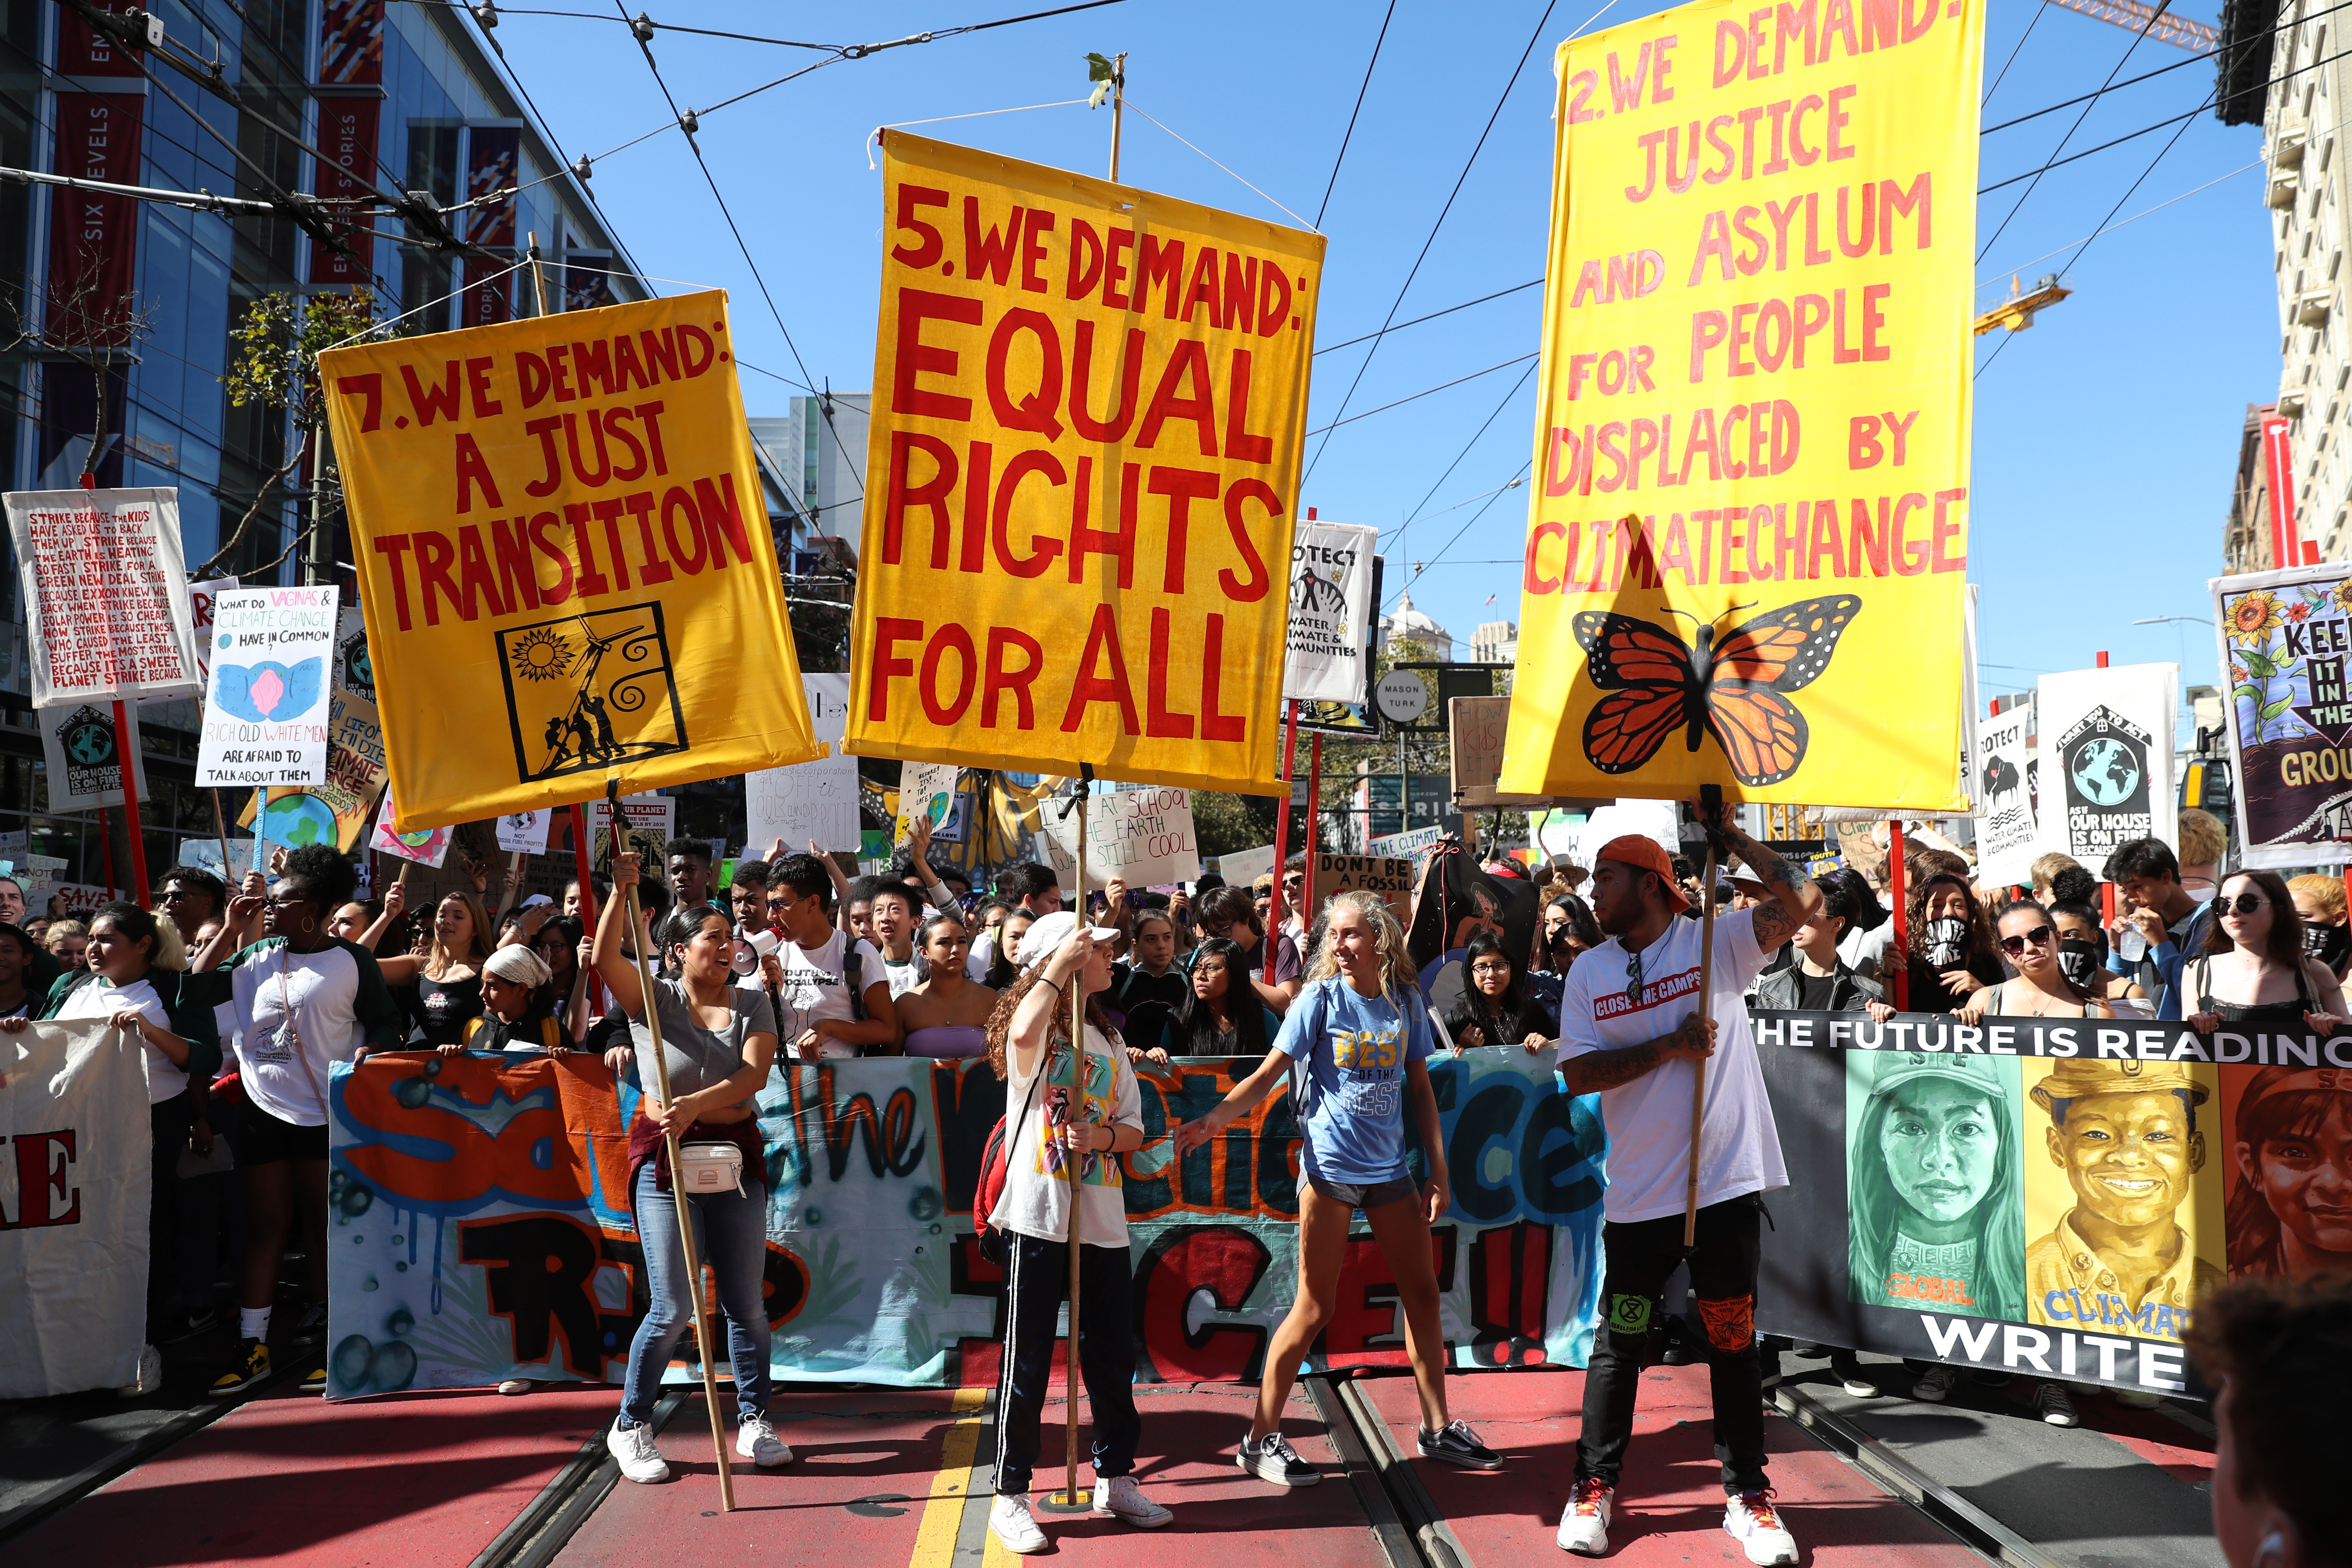 Young activists and their supporters hold signs as they march during a Global Climate Strike demonstration on September 20, 2019 in San Francisco, California. (Photo by Justin Sullivan/Getty Images)